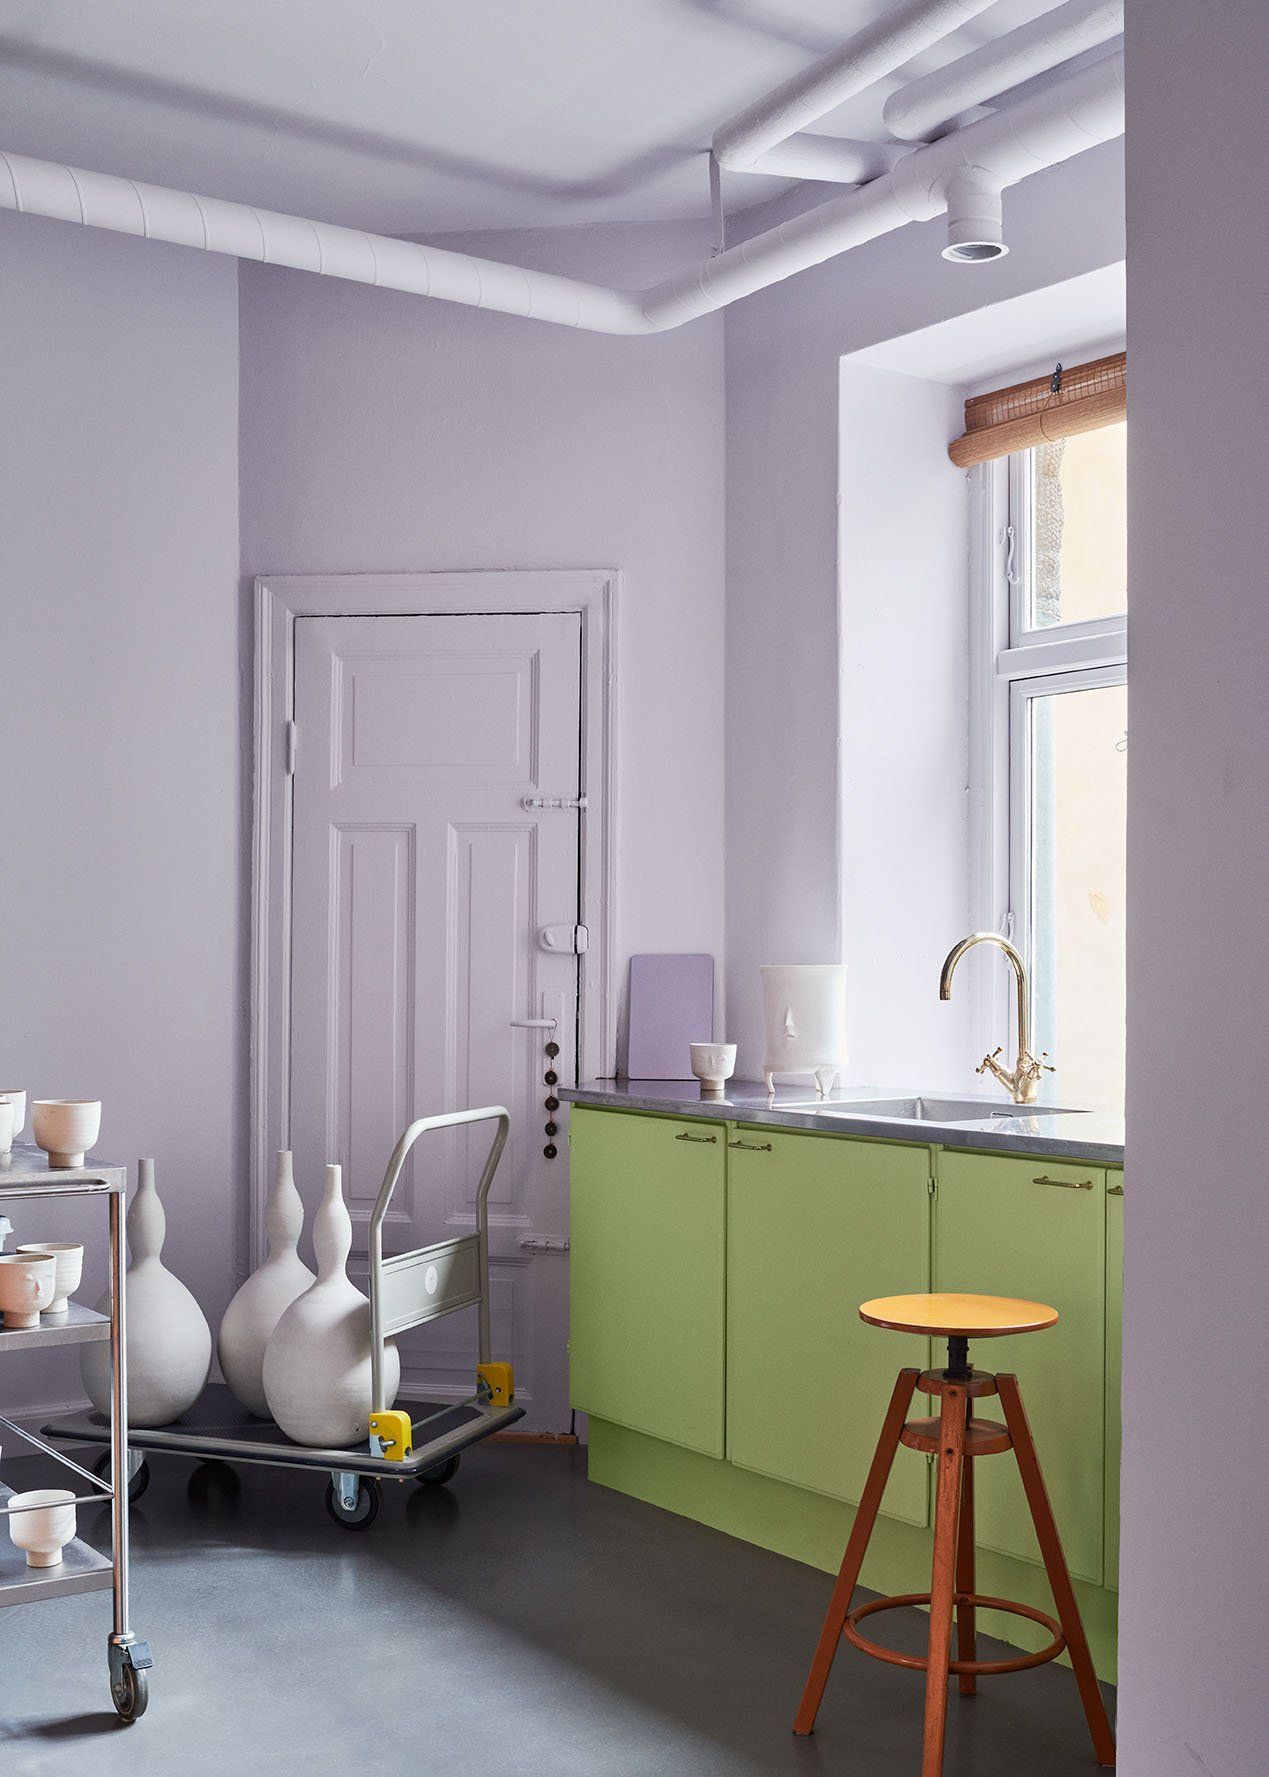 Kitchen fronts painted with 'Lime Juice'